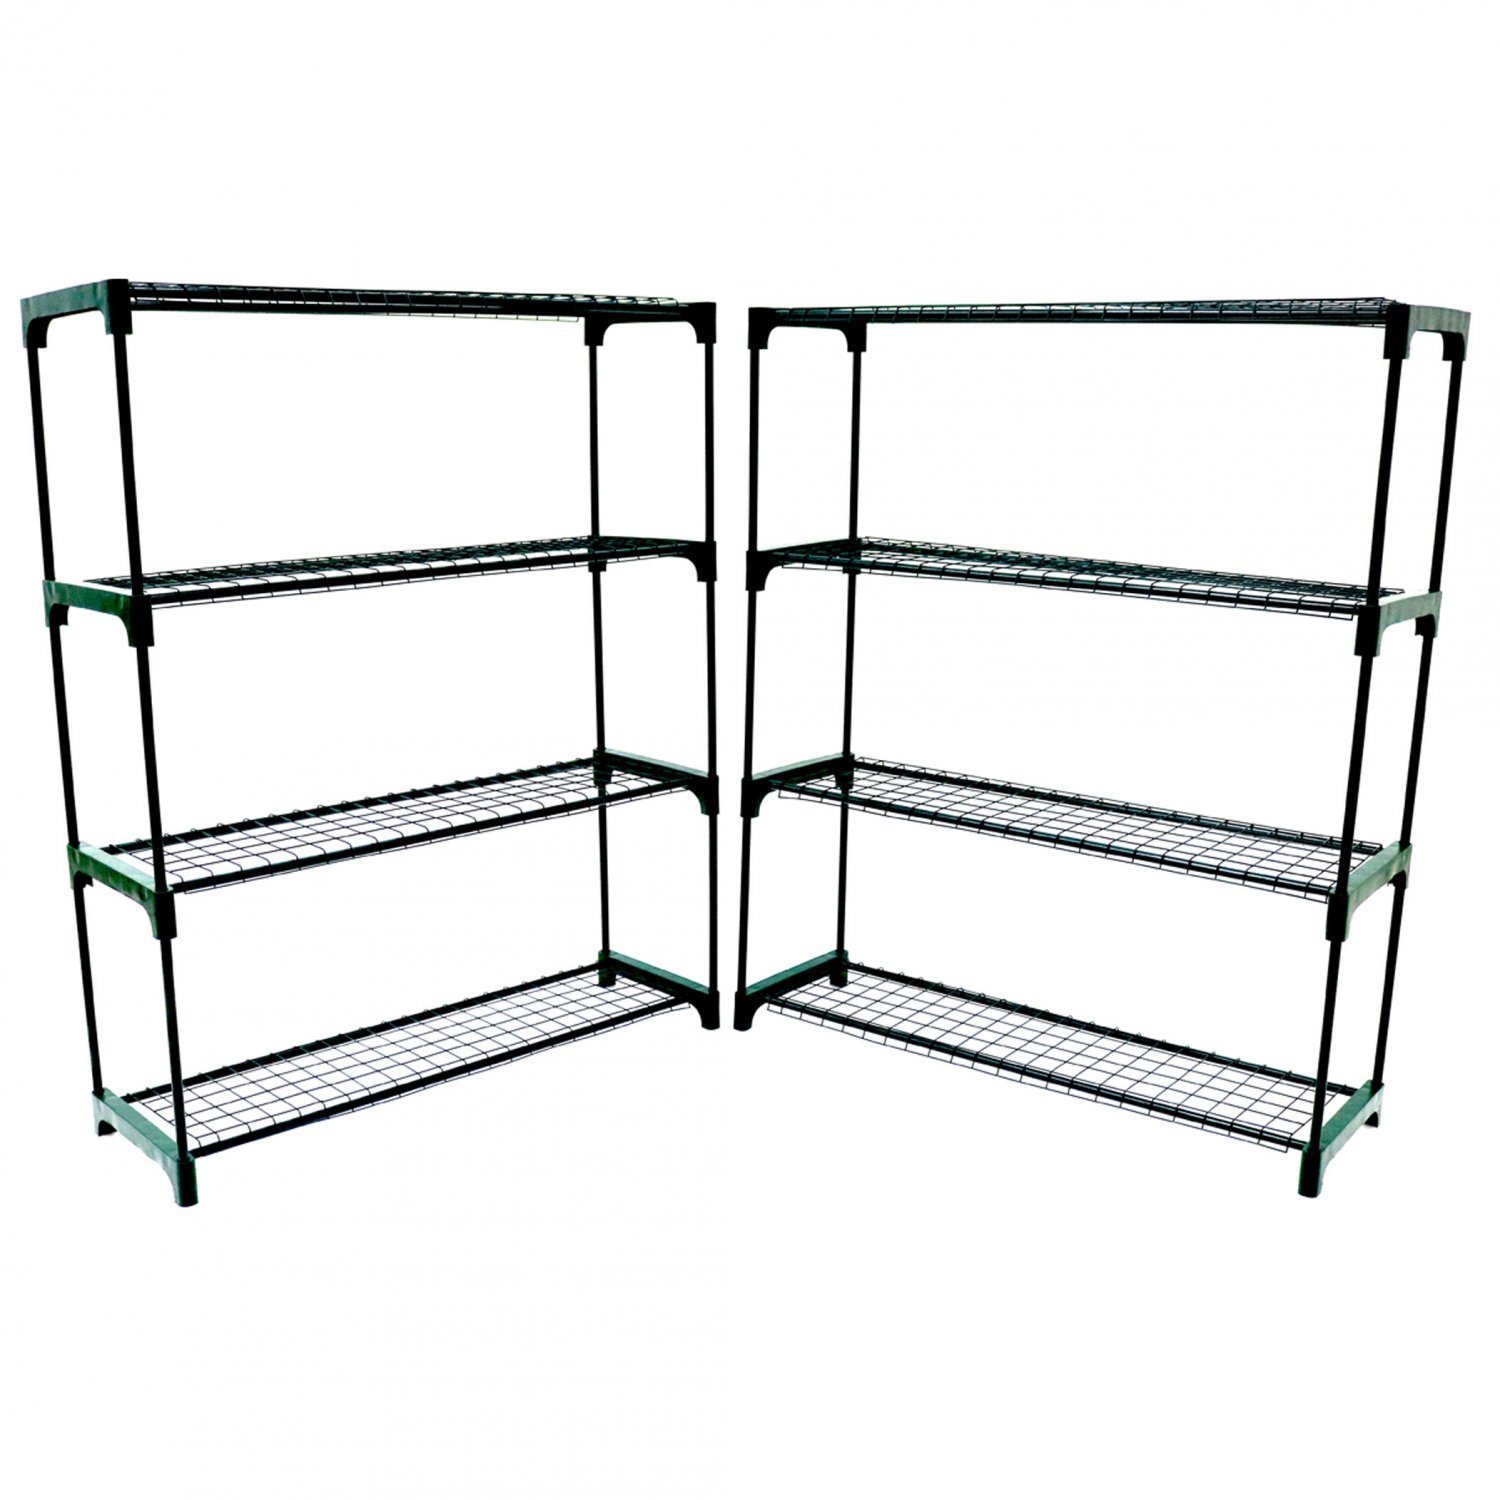 Double Pack Flower Staging Display, Greenhouse Shelving Units